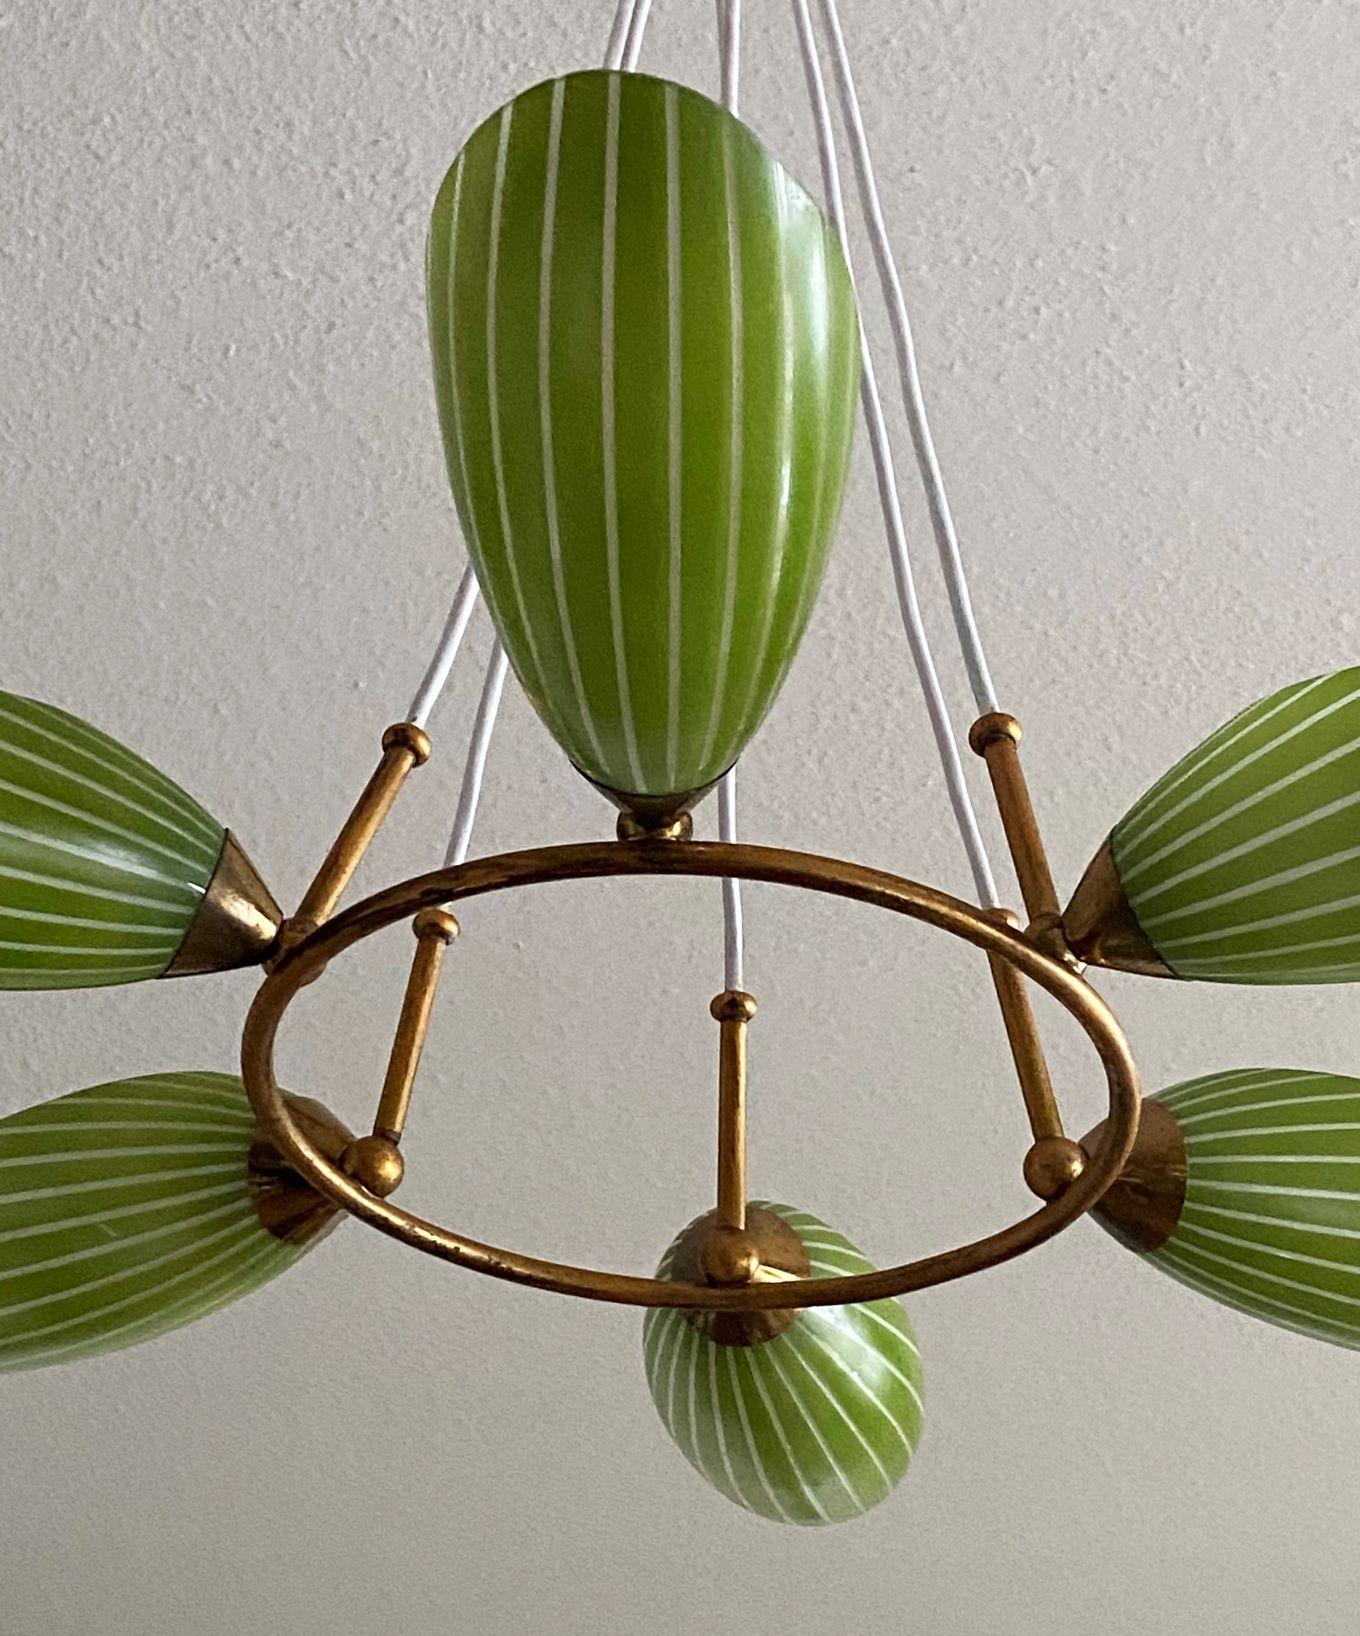 Stilnovo Chandelier Six Green and White Glass Tulips Brass Mounted, Italy, 1950s For Sale 7